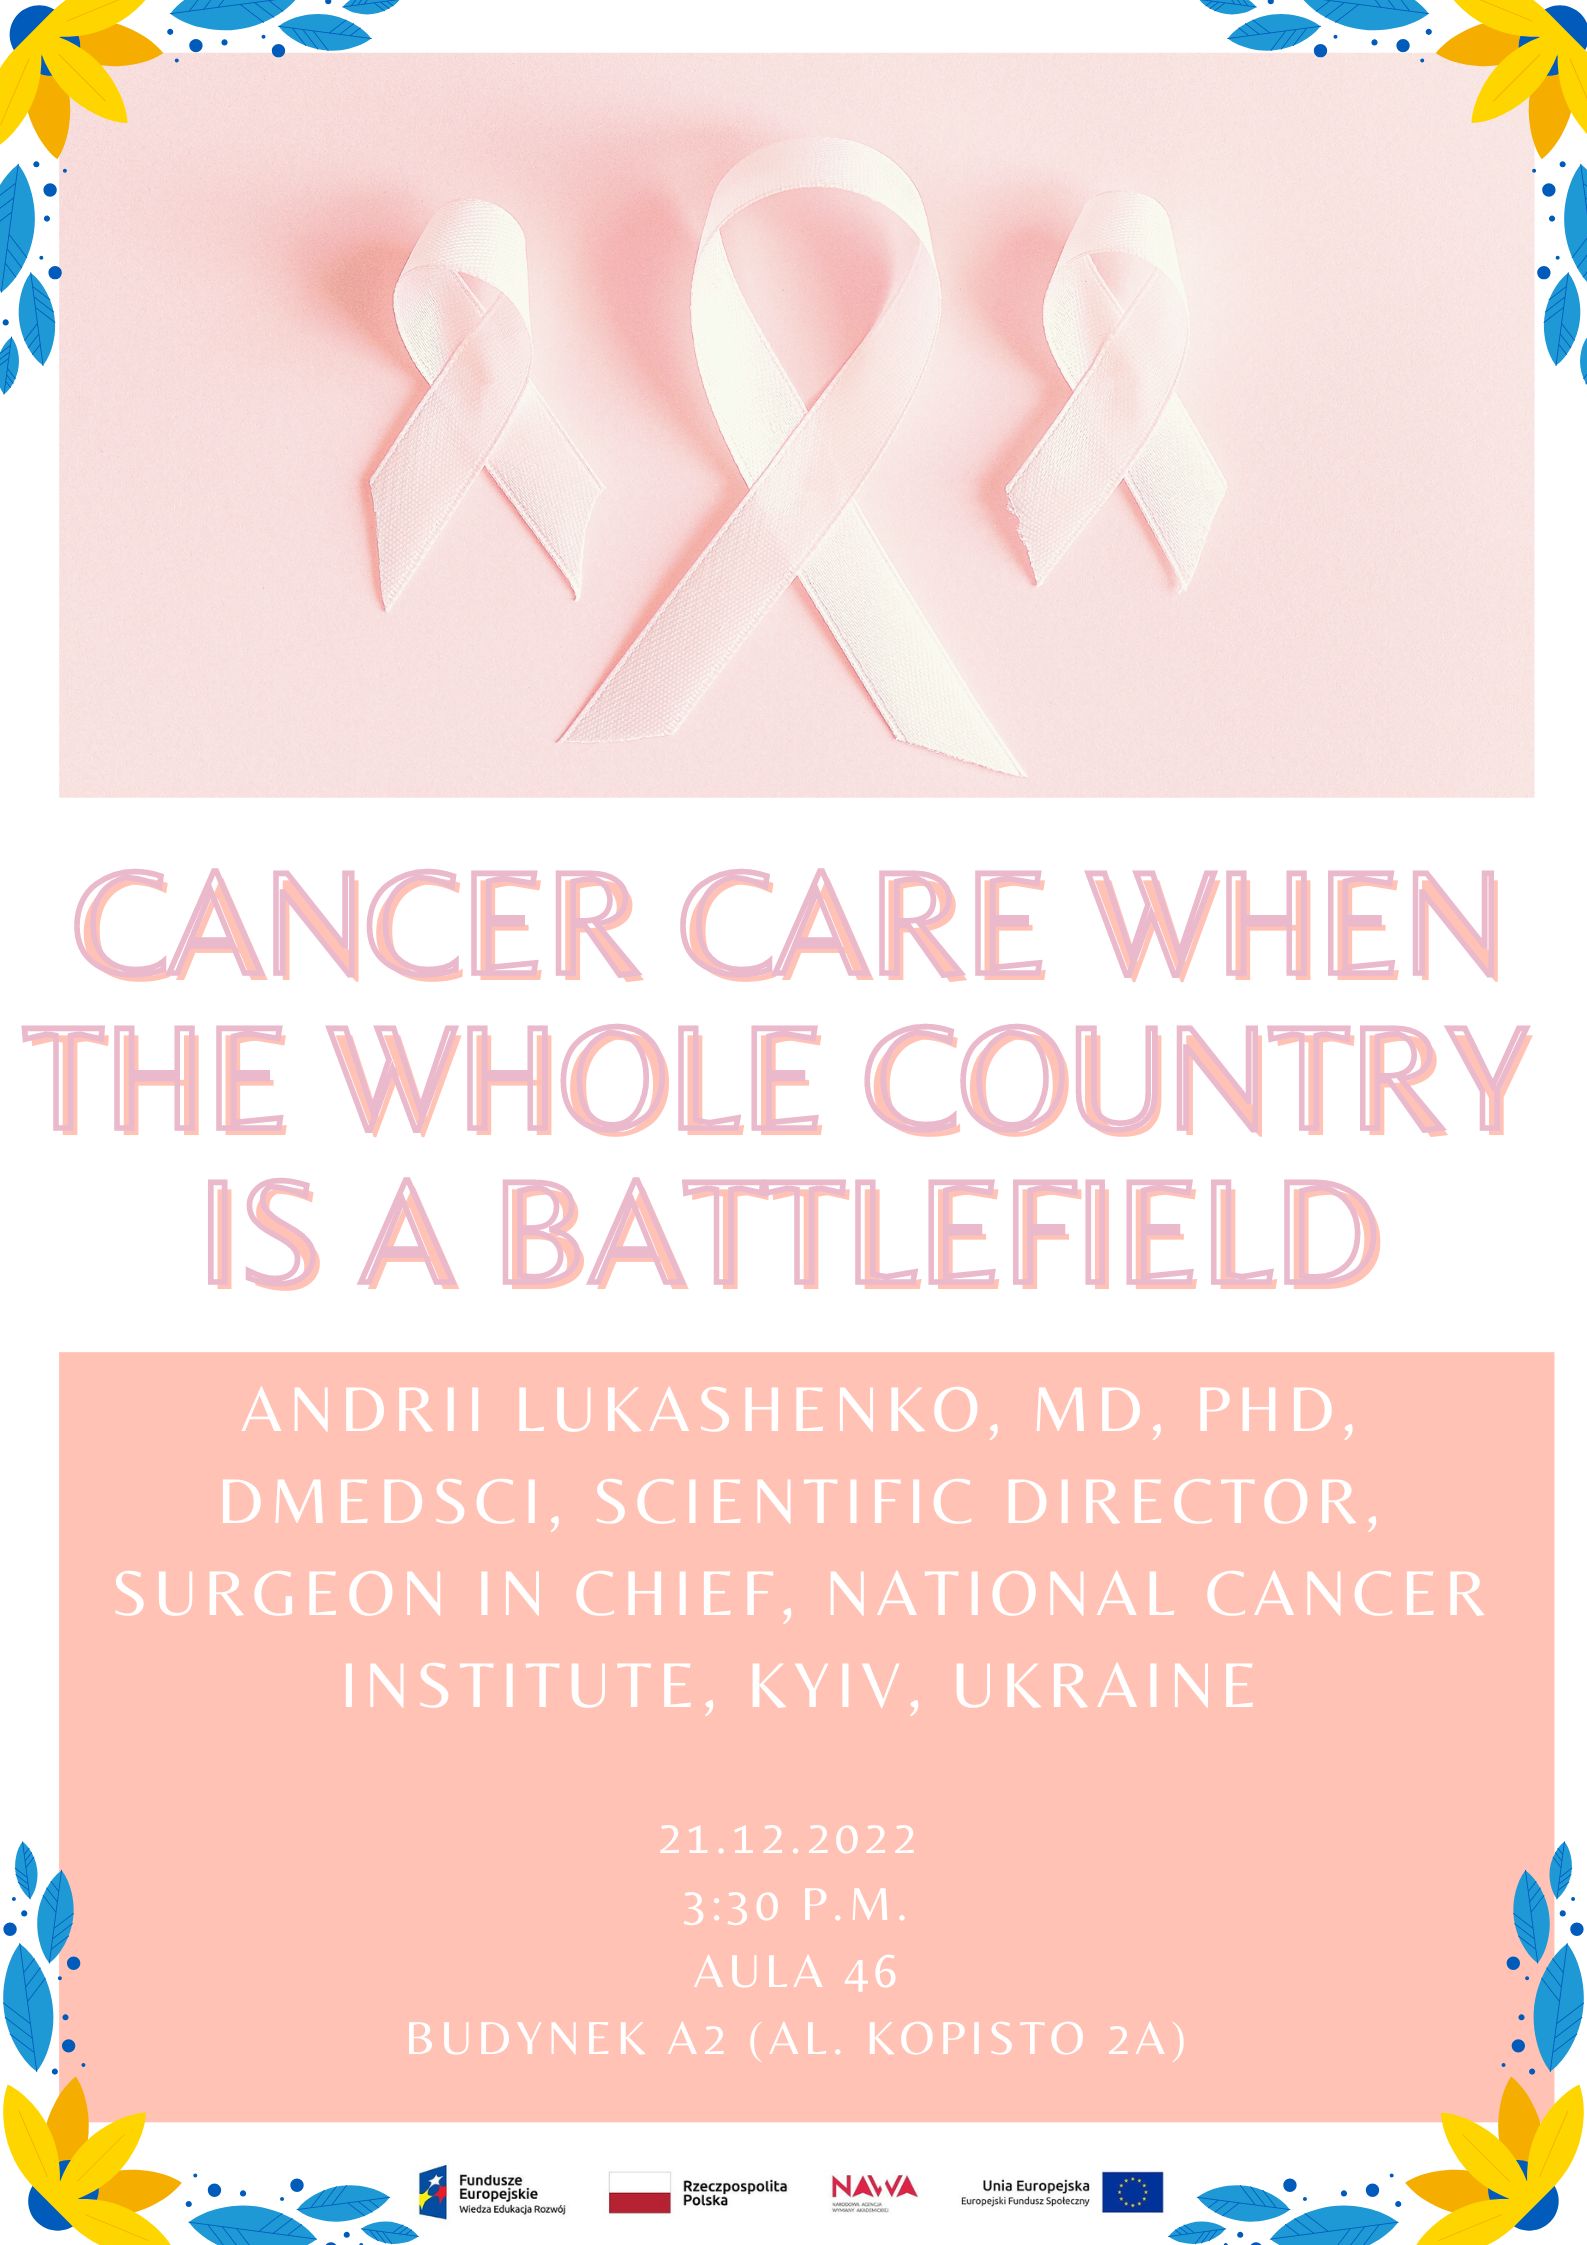 Pink Photo Cancer Fundraising Poster.jpg [270.67 KB]